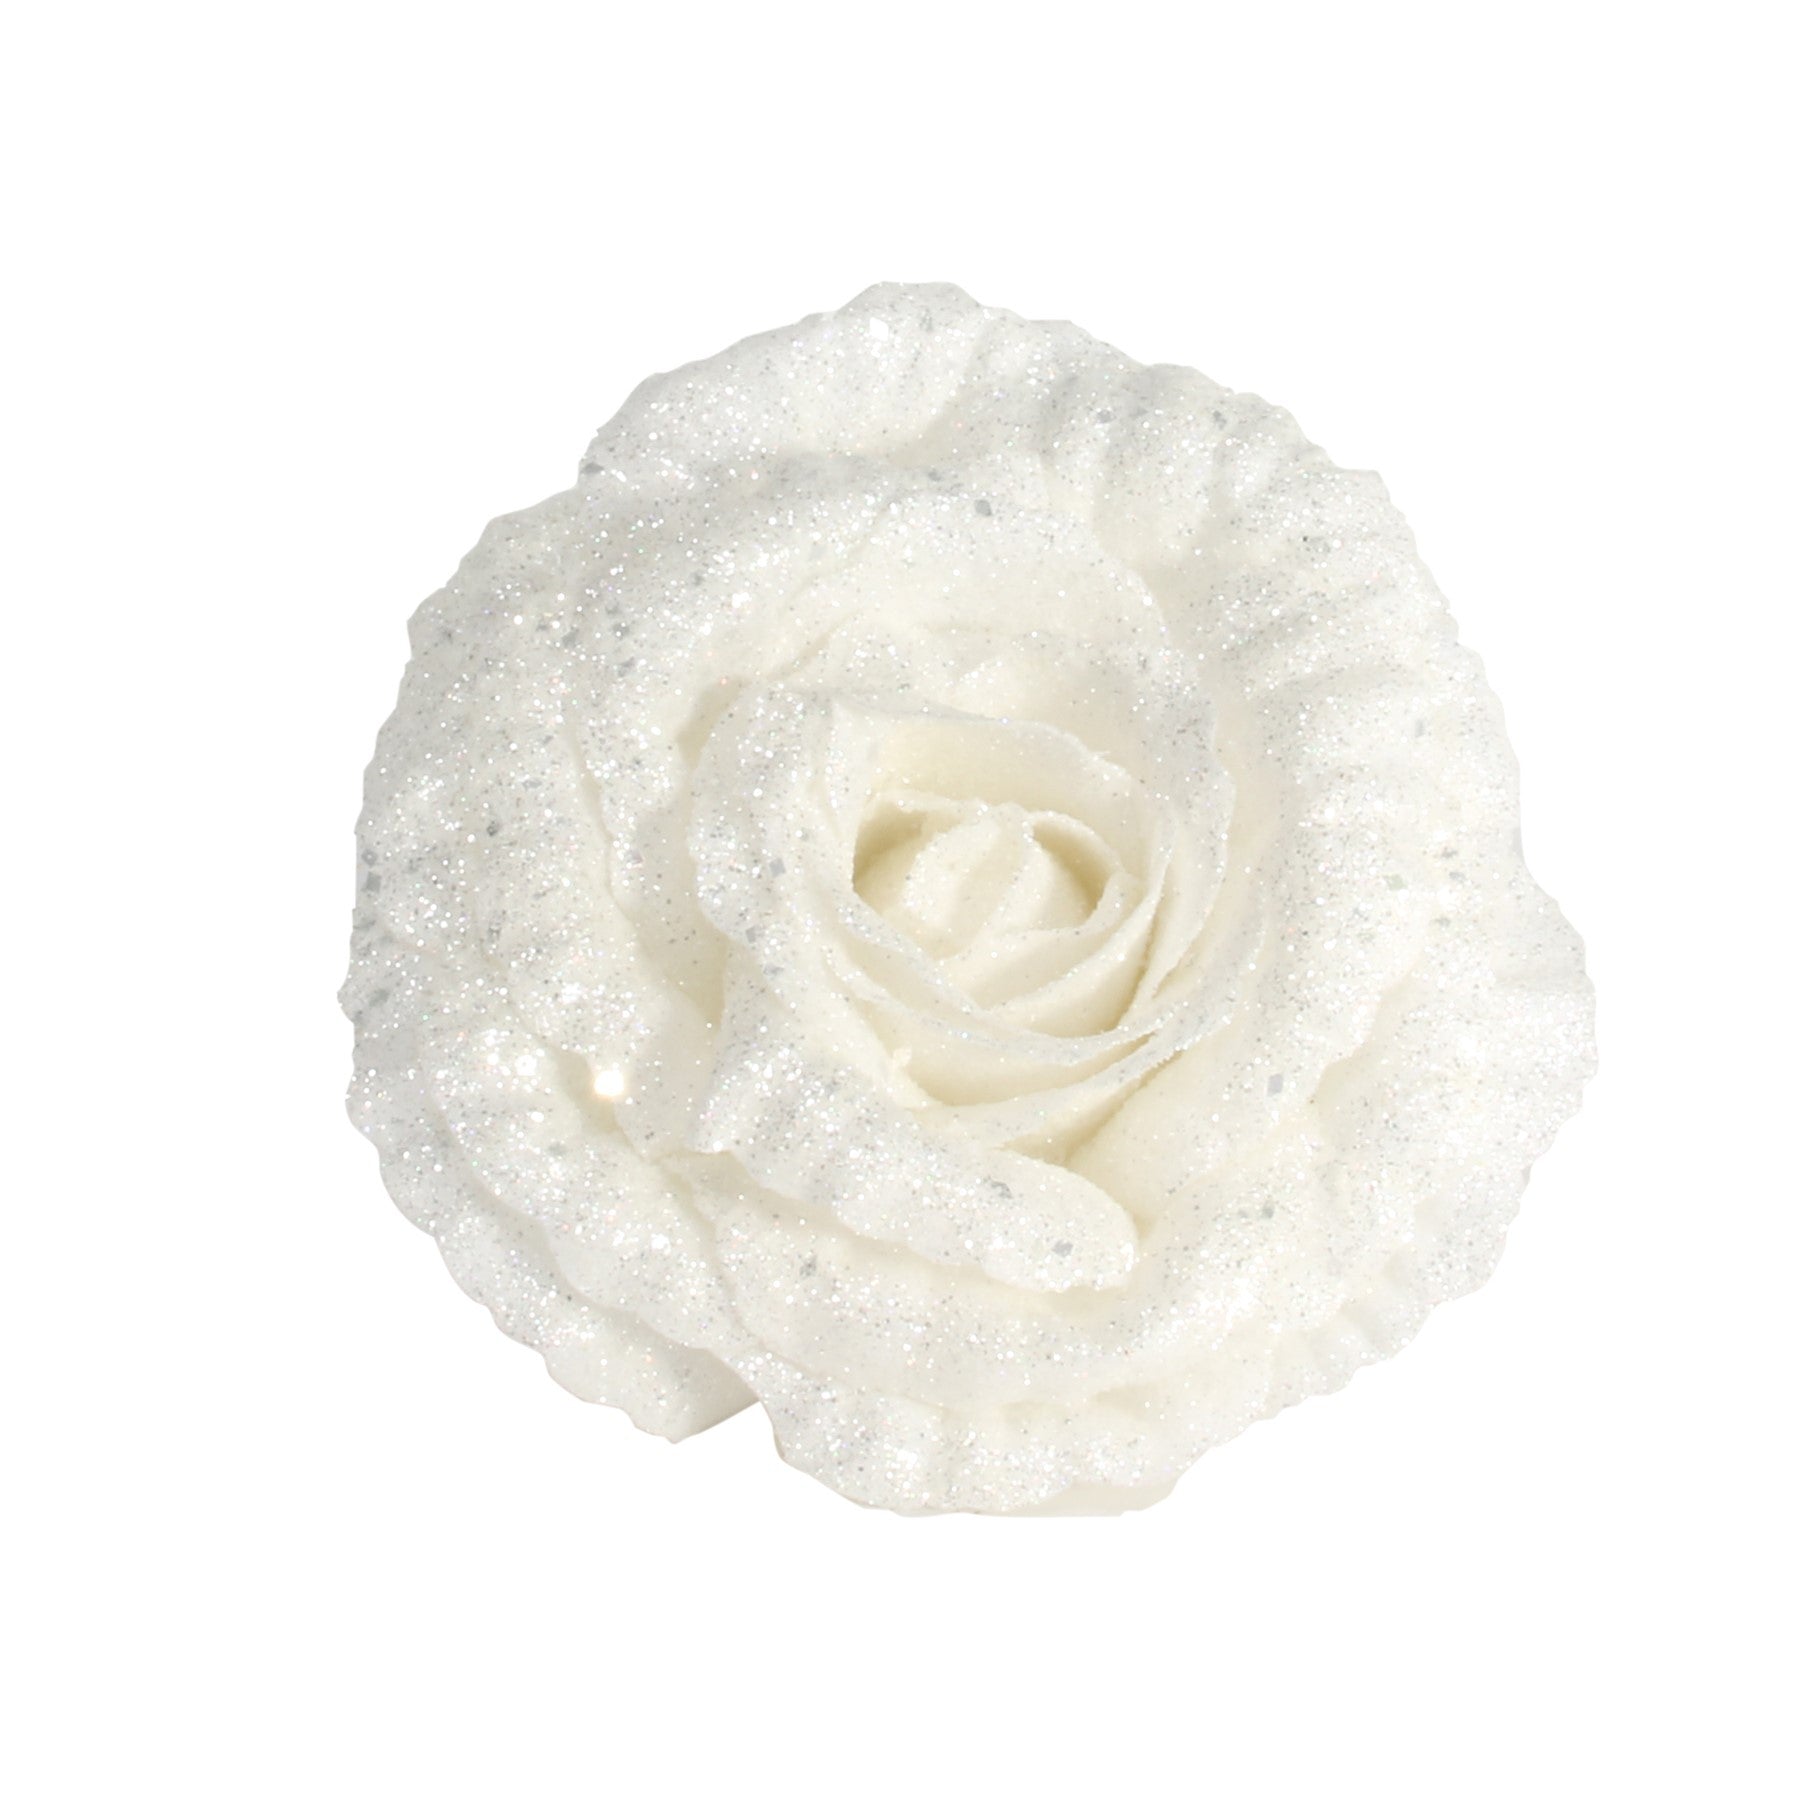 View White Rose with Glitter and Clip Dia18cm information